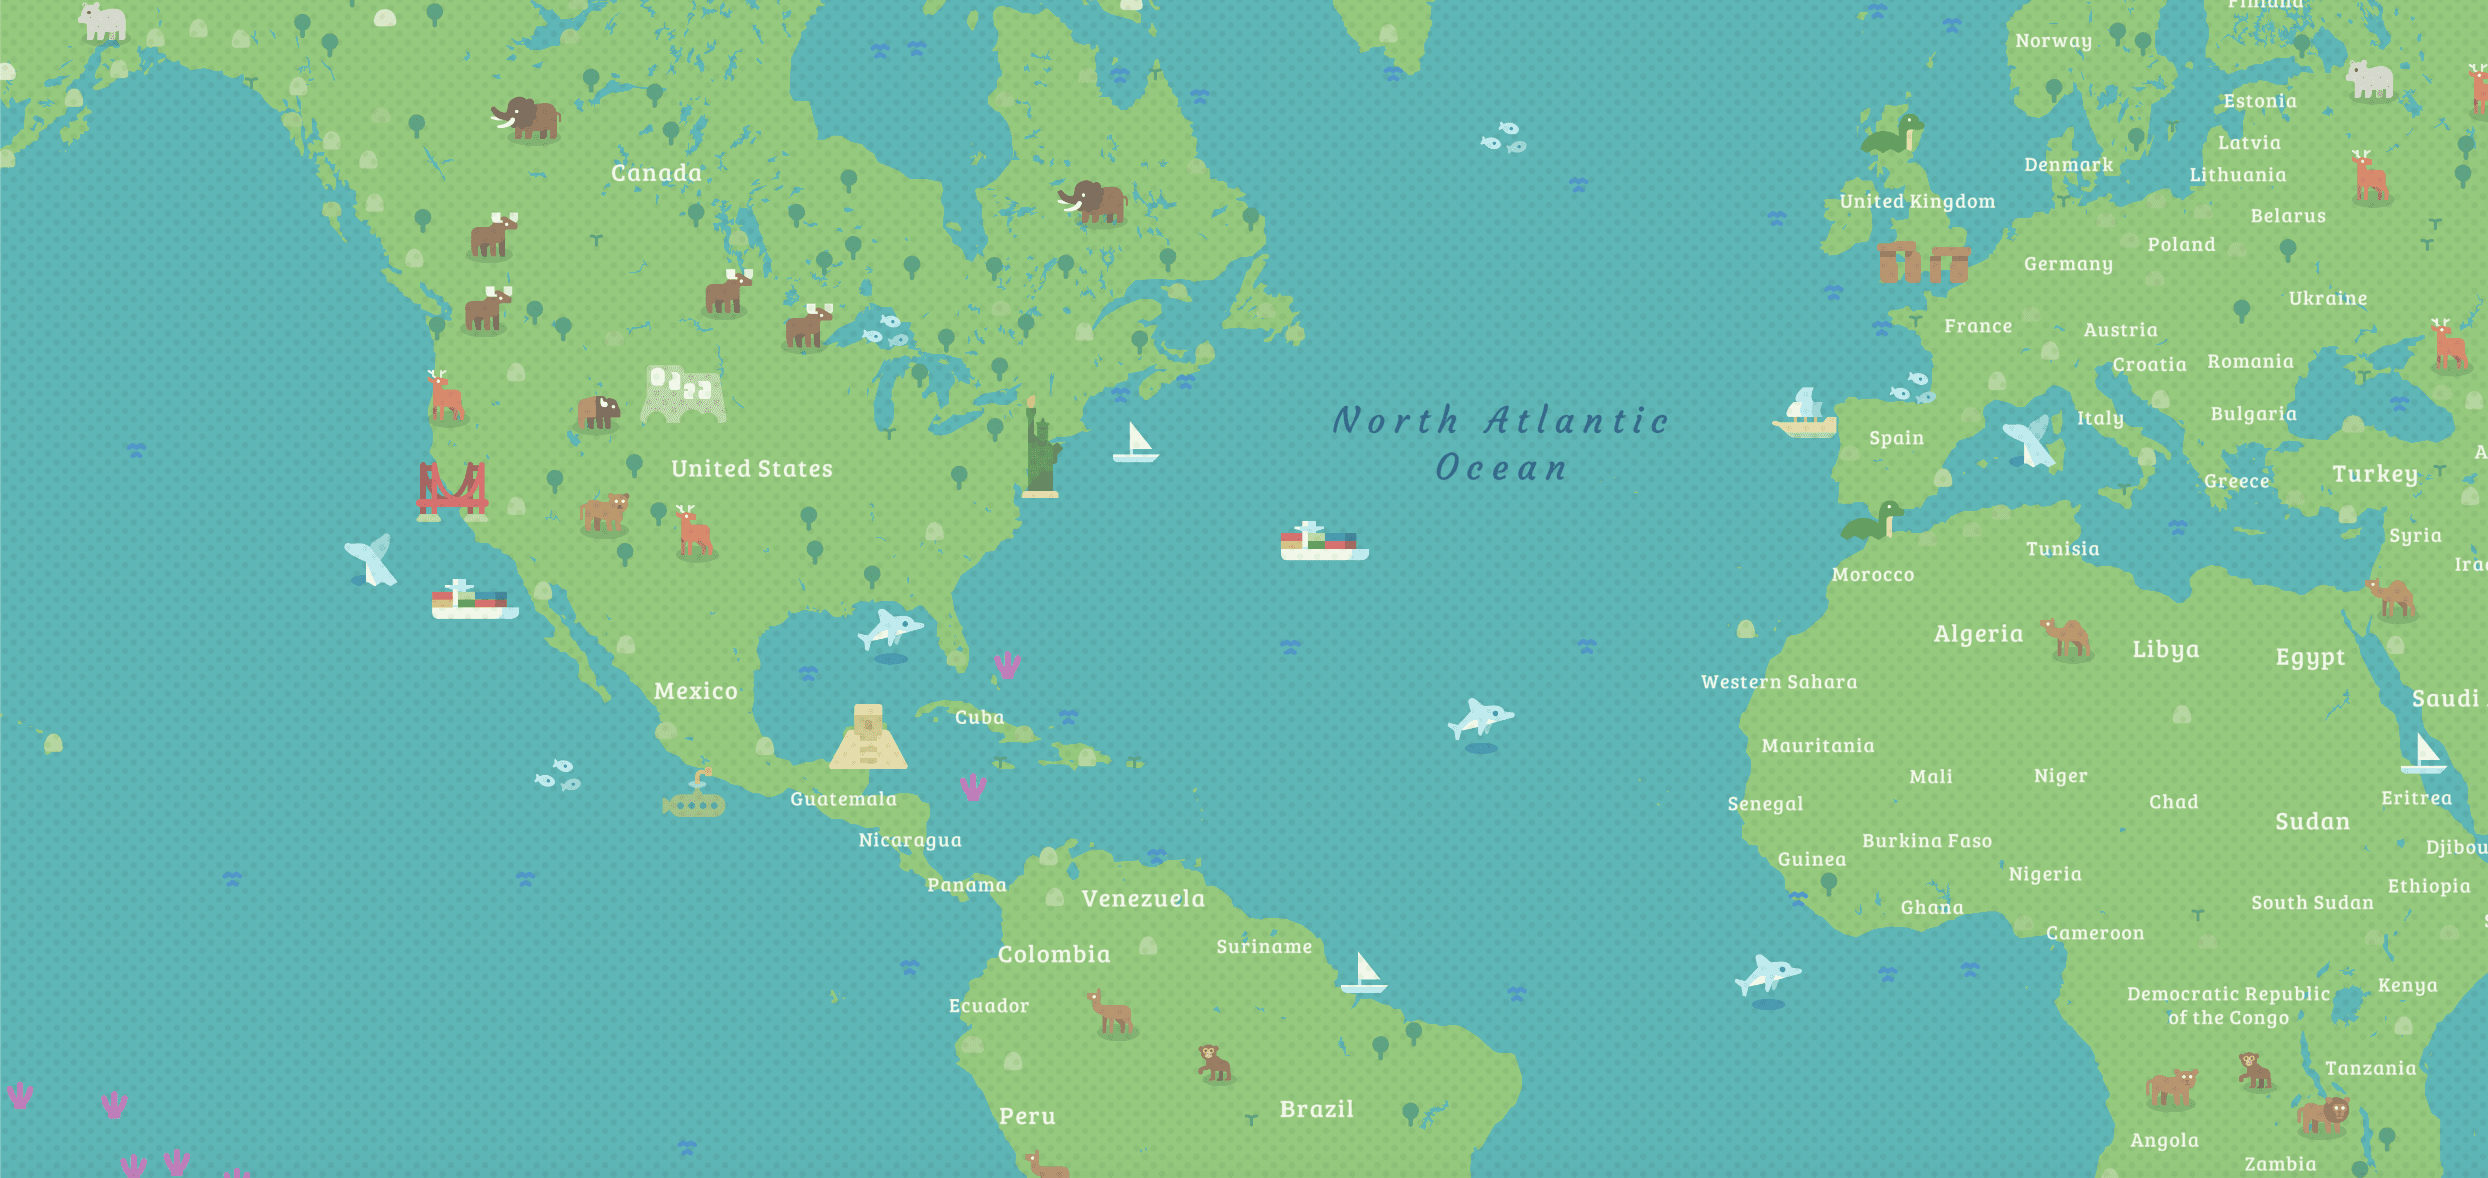 Mapbox_map_styles_Global_view_in_Story_Book_style_8a2e65c76c.png?